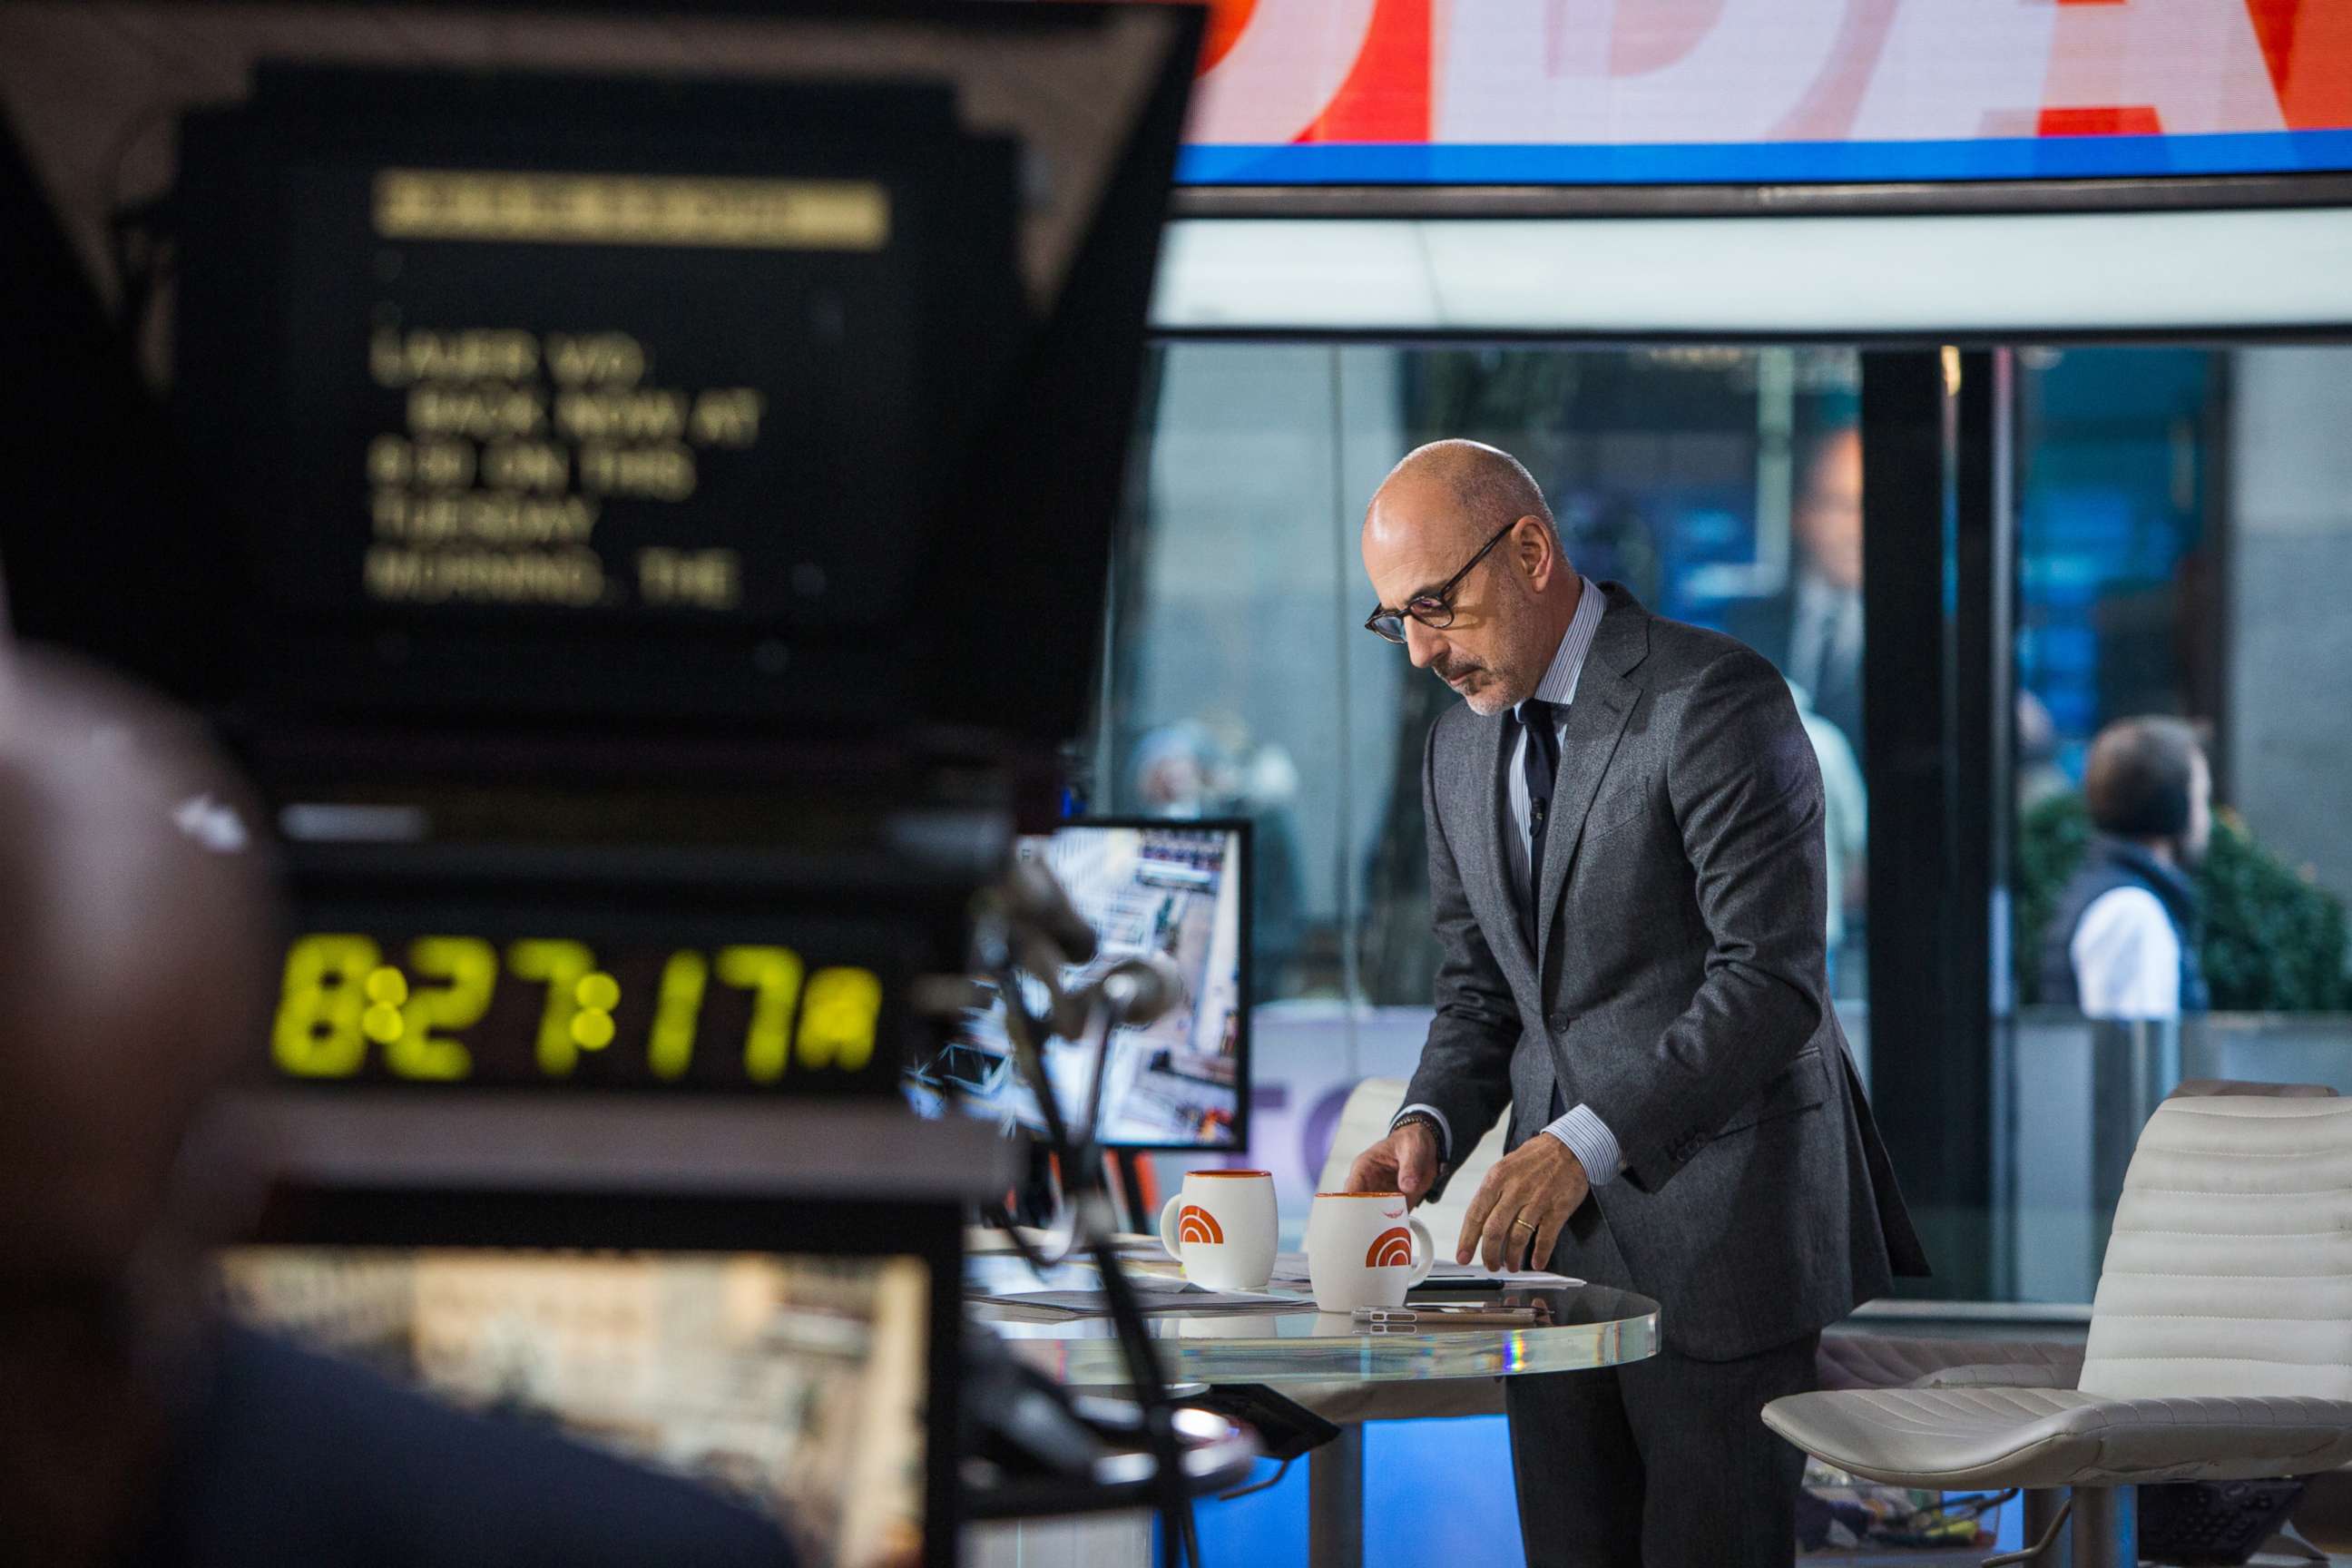 PHOTO: Matt Lauer on the "Today" show in this Nov. 21, 2017 file photo.